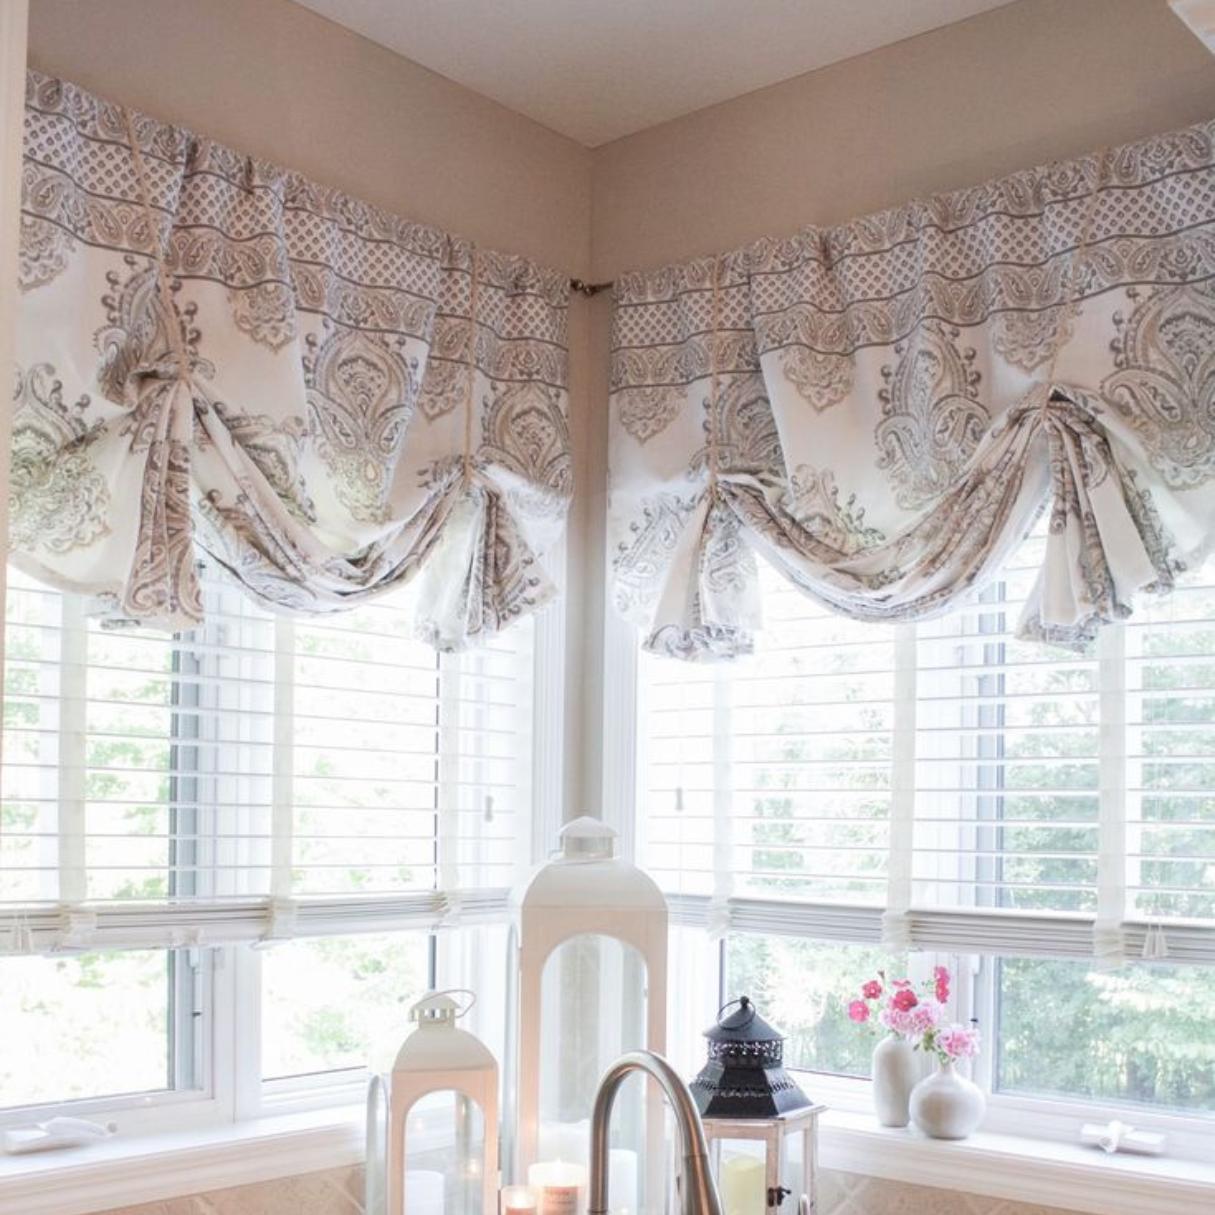 How To Make Kitchen Curtain Valances